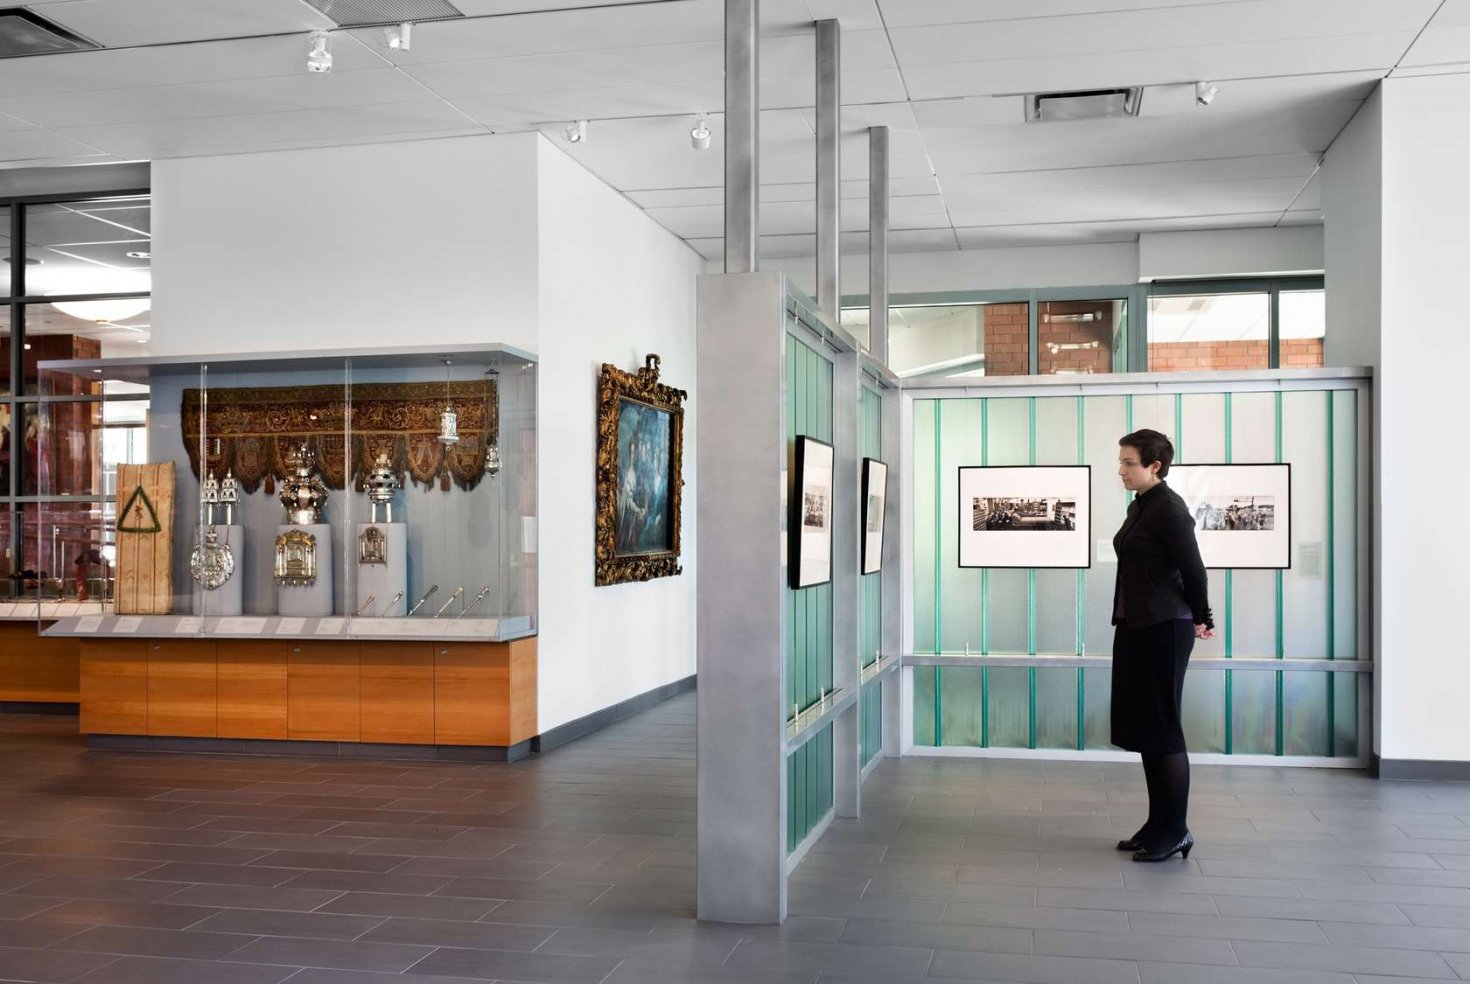 Derfner Judaica Museum And The Art Collection at The Hebrew Home at Riverdale